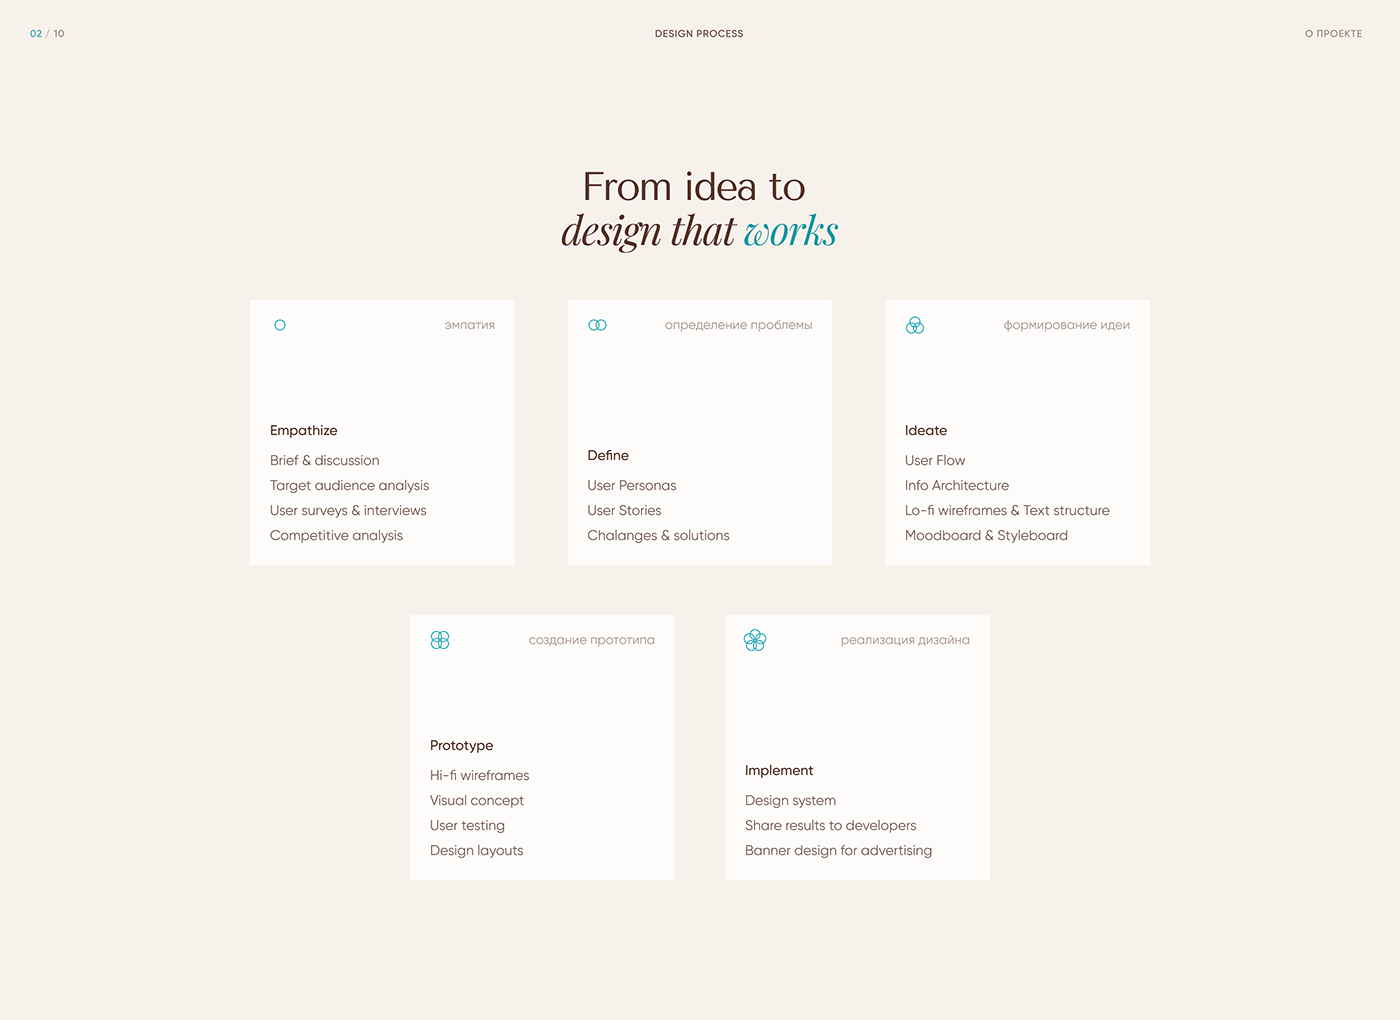 Design Process / From ides to design that works